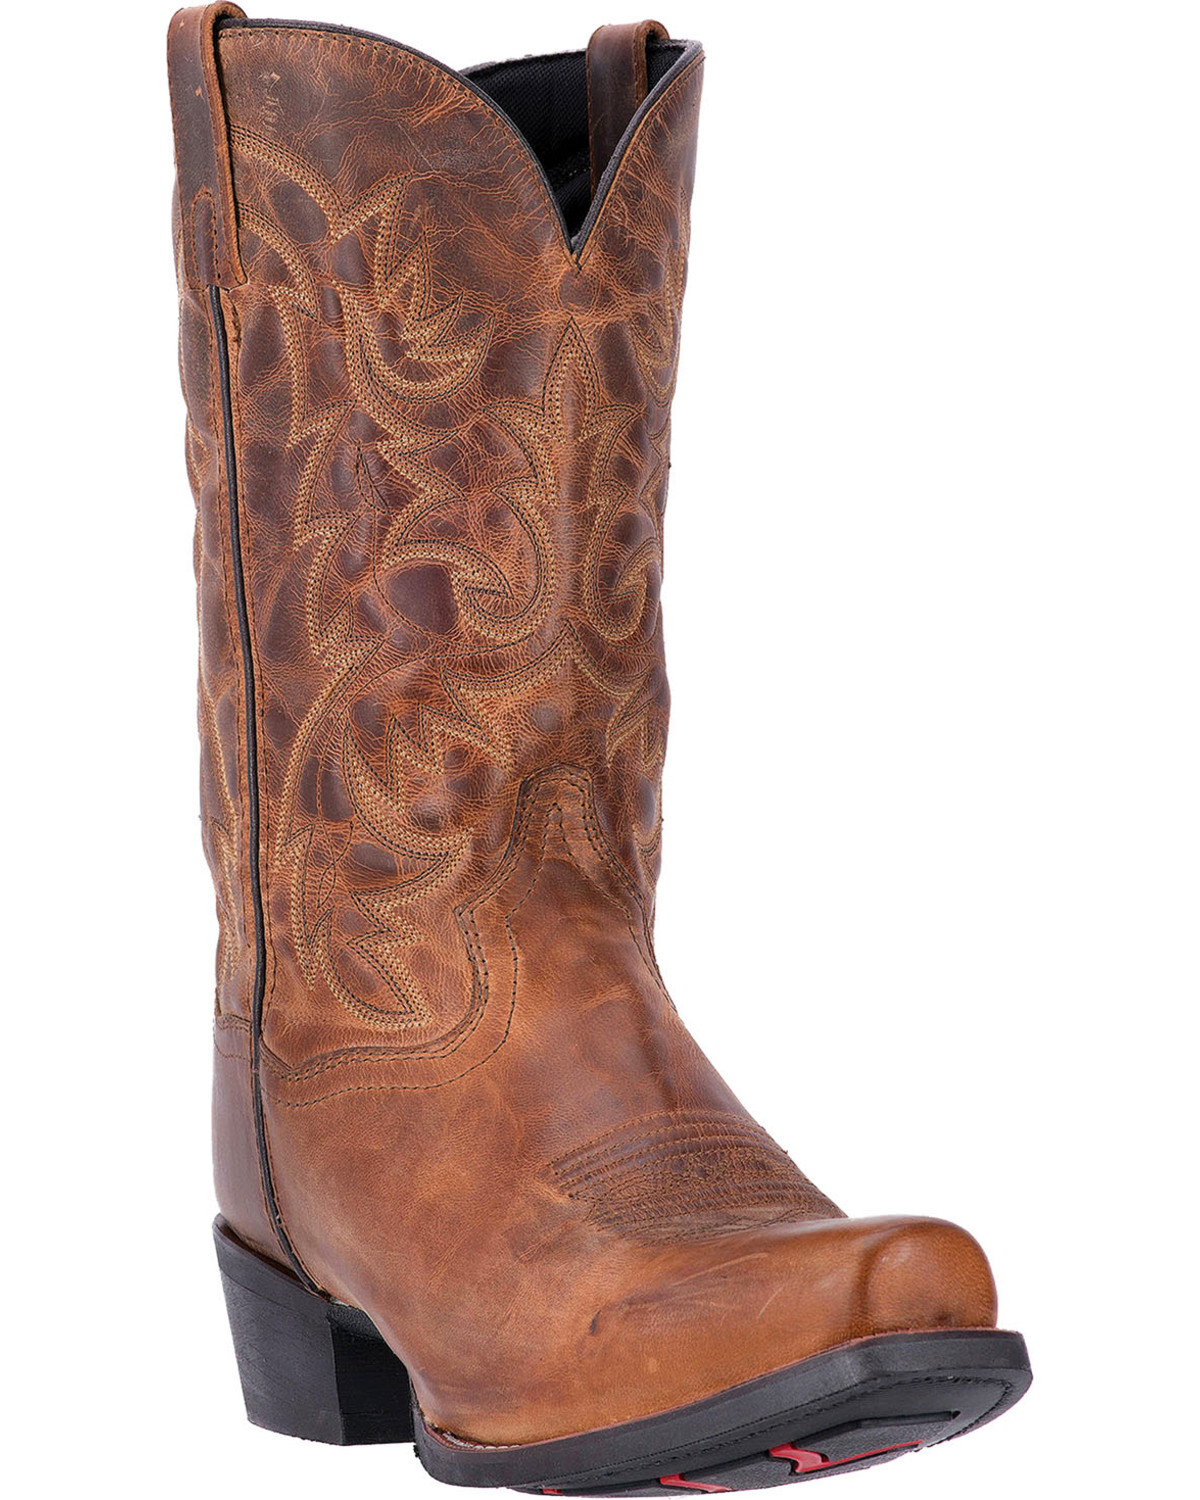 Laredo Men's Distressed Embroidery Western Boots